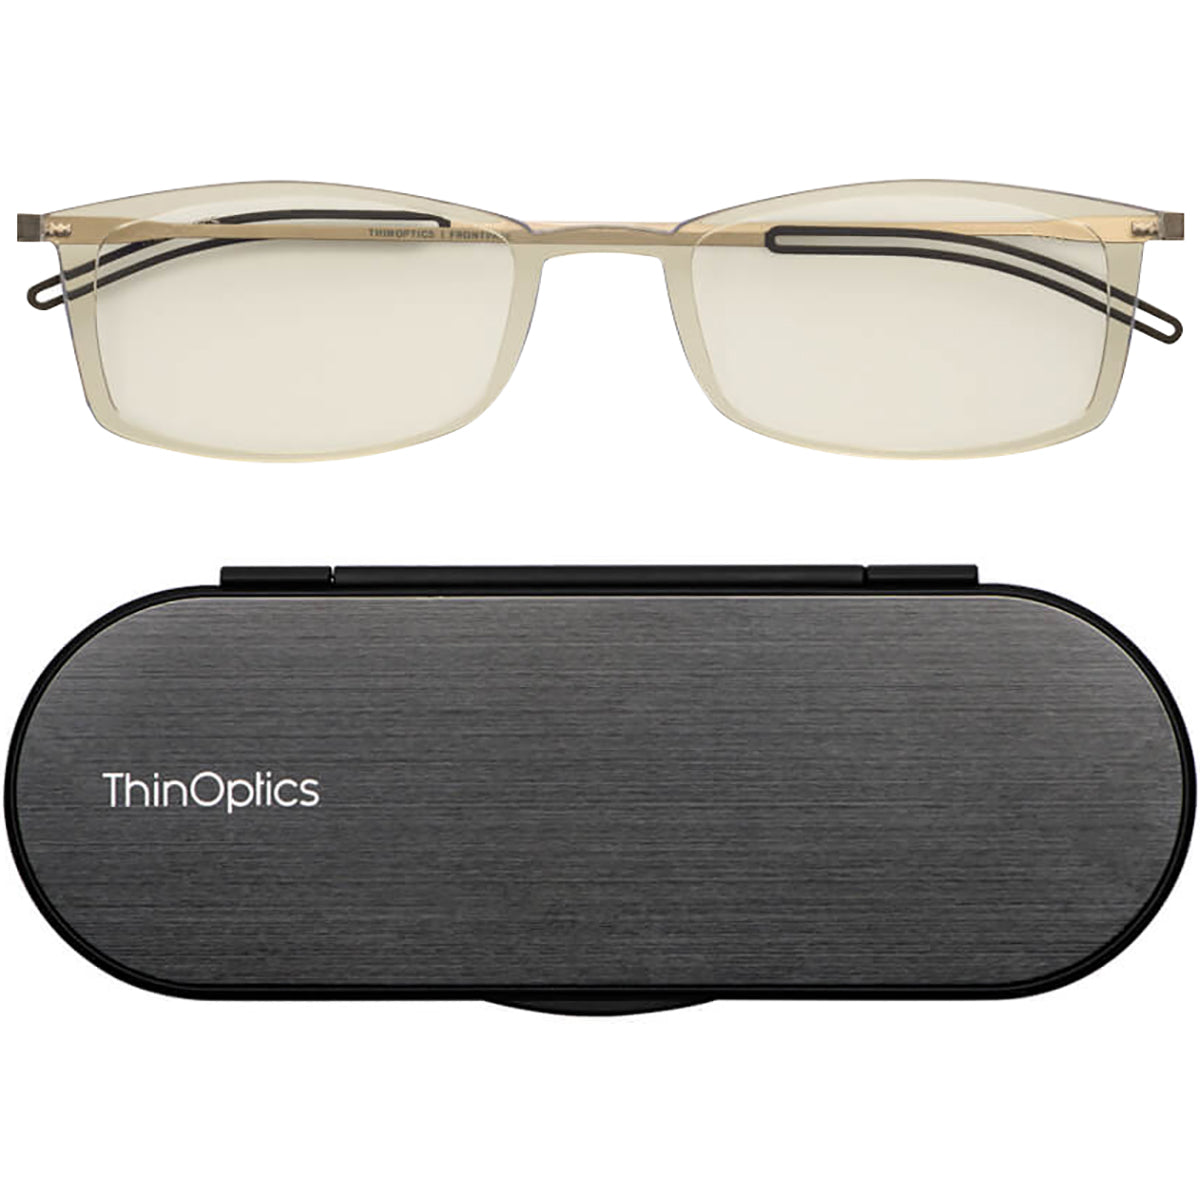 All you Need to Know About ThinOptics Reading Glasses - Framesbuy Blog -  Stuff that matters, daily updates on eye care and fashion.